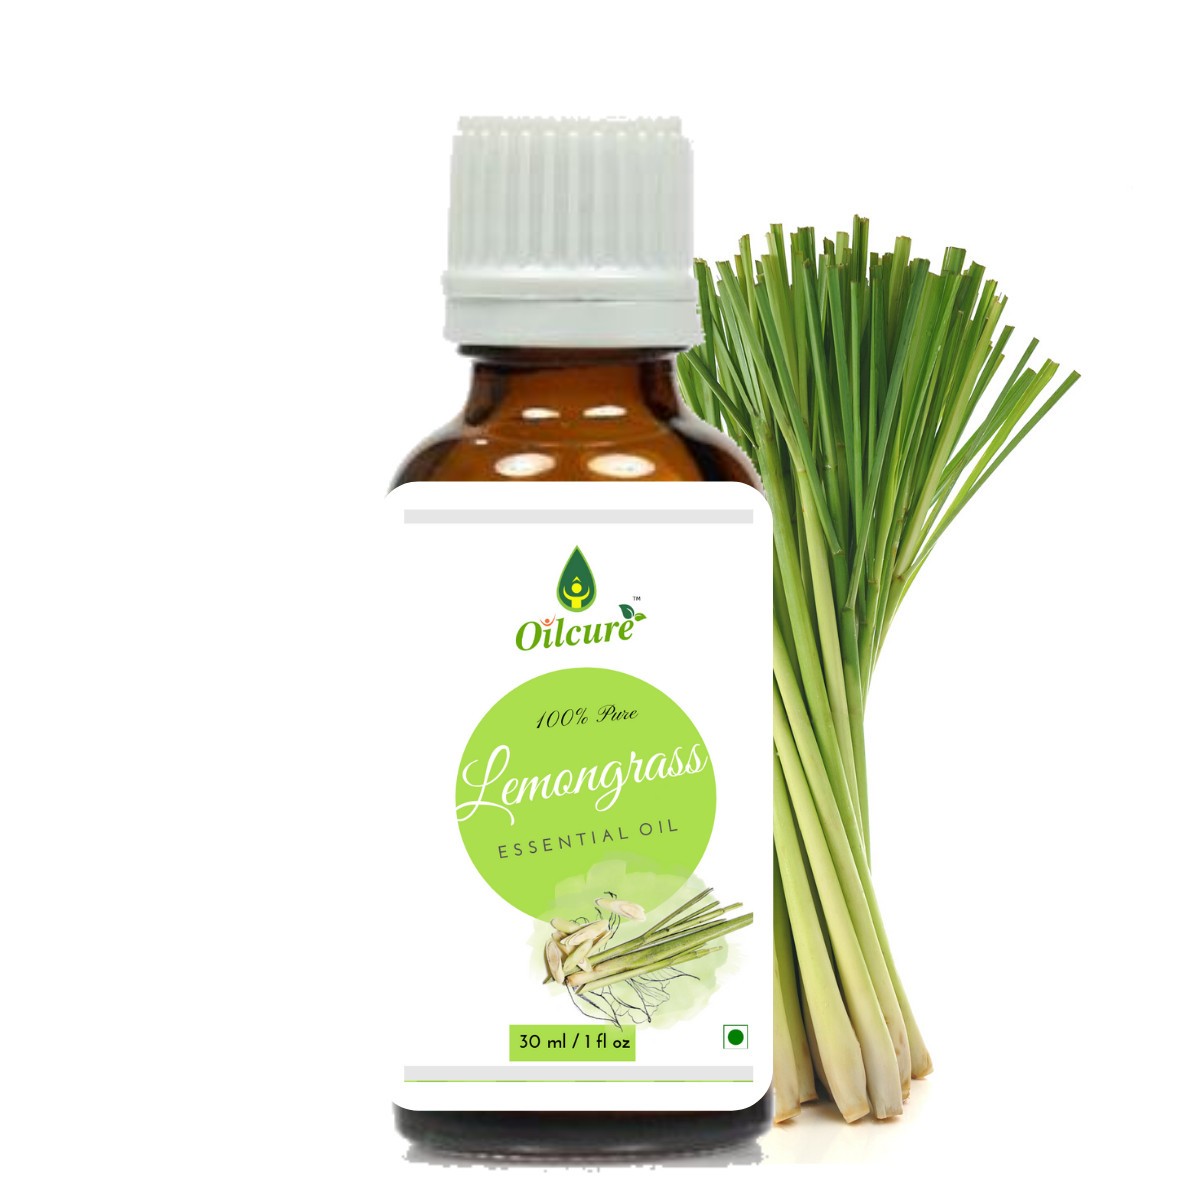  Lemongrass oil has a fresh, citrusy, and uplifting aroma, which makes it a popular ingredient in aromatherapy and various beauty and personal care products.